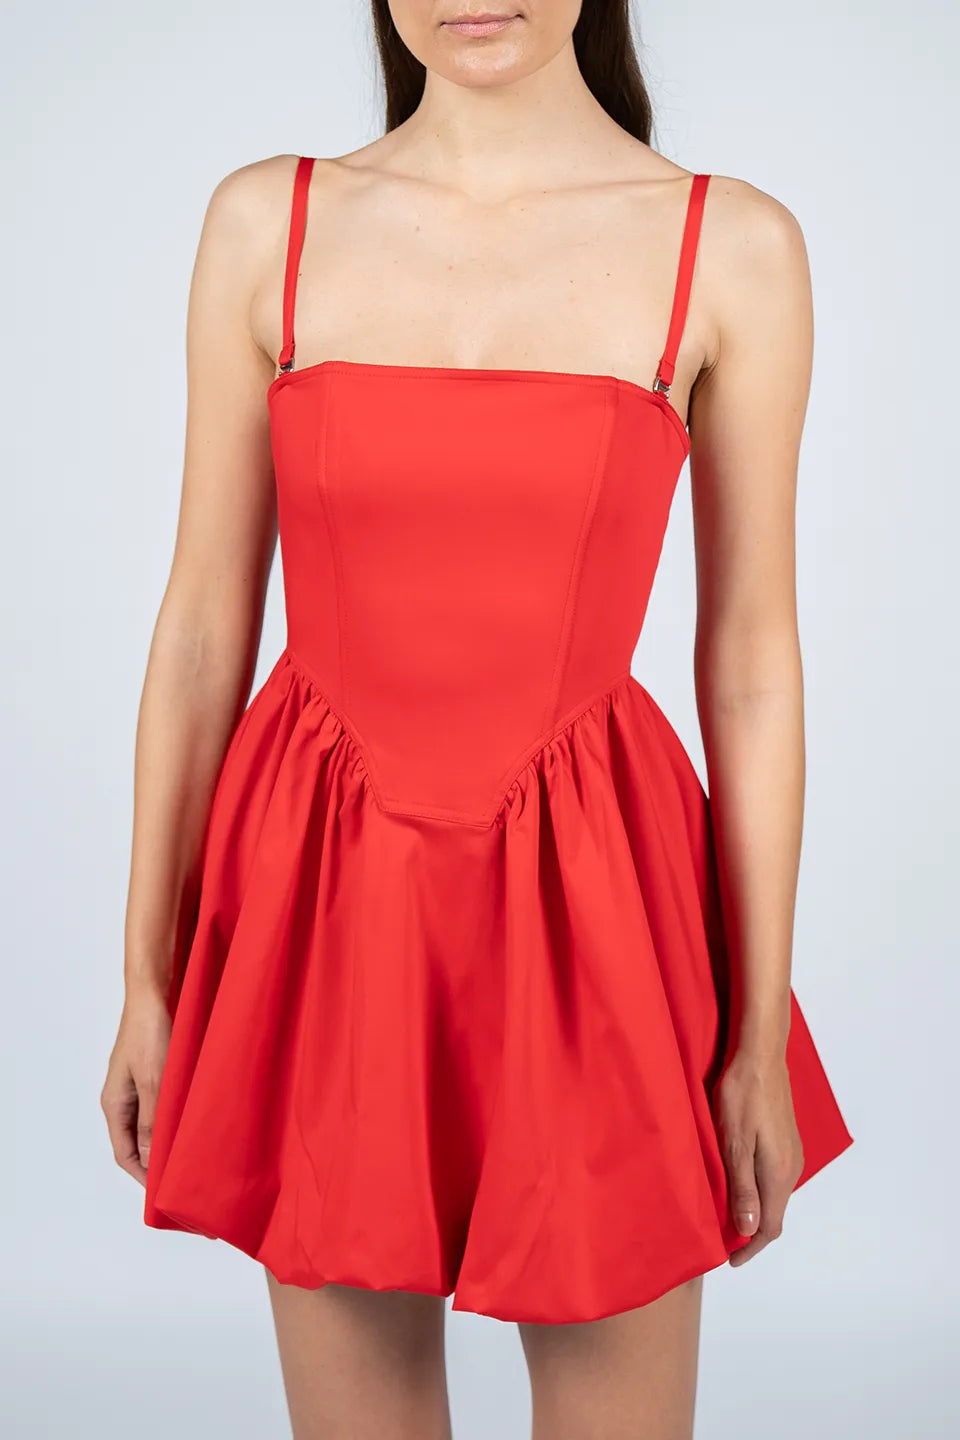 Shop online trendy Red Mini dresses from Vivetta Fashion designer. Product gallery 1